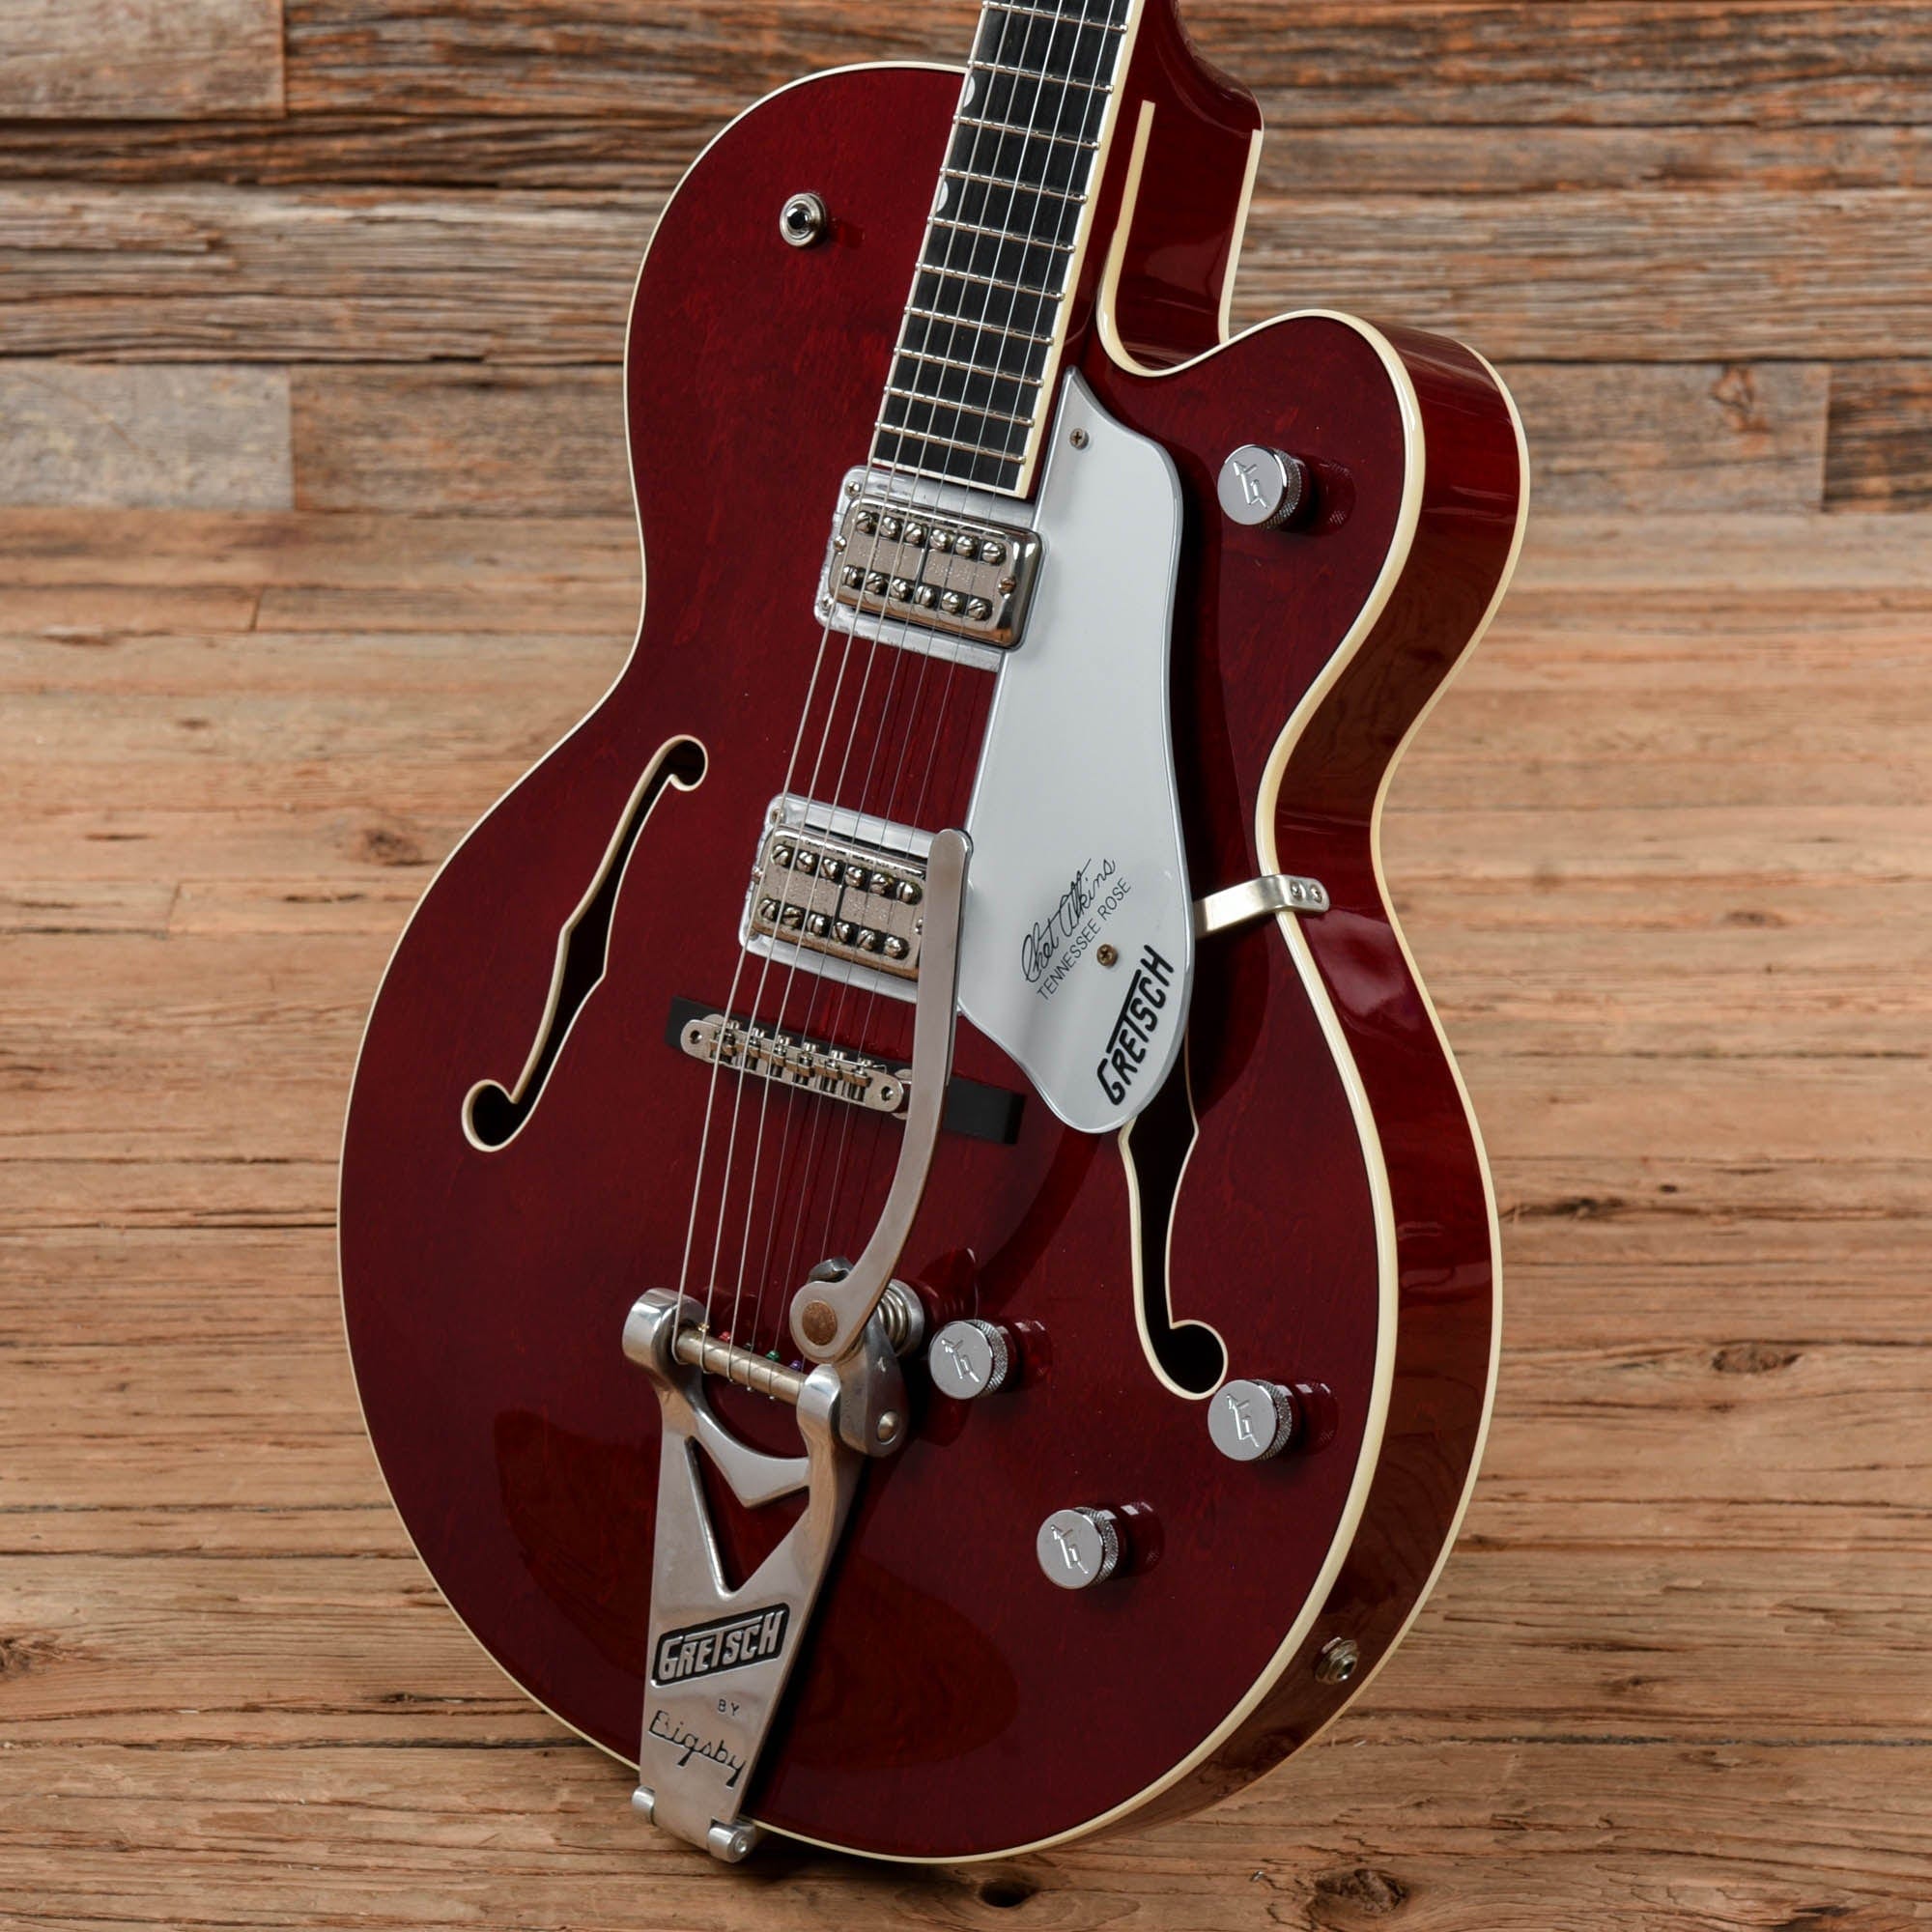 Gretsch G6119 Chet Atkins Tennessee Rose Deep Cherry Stain 2012 Electric Guitars / Hollow Body